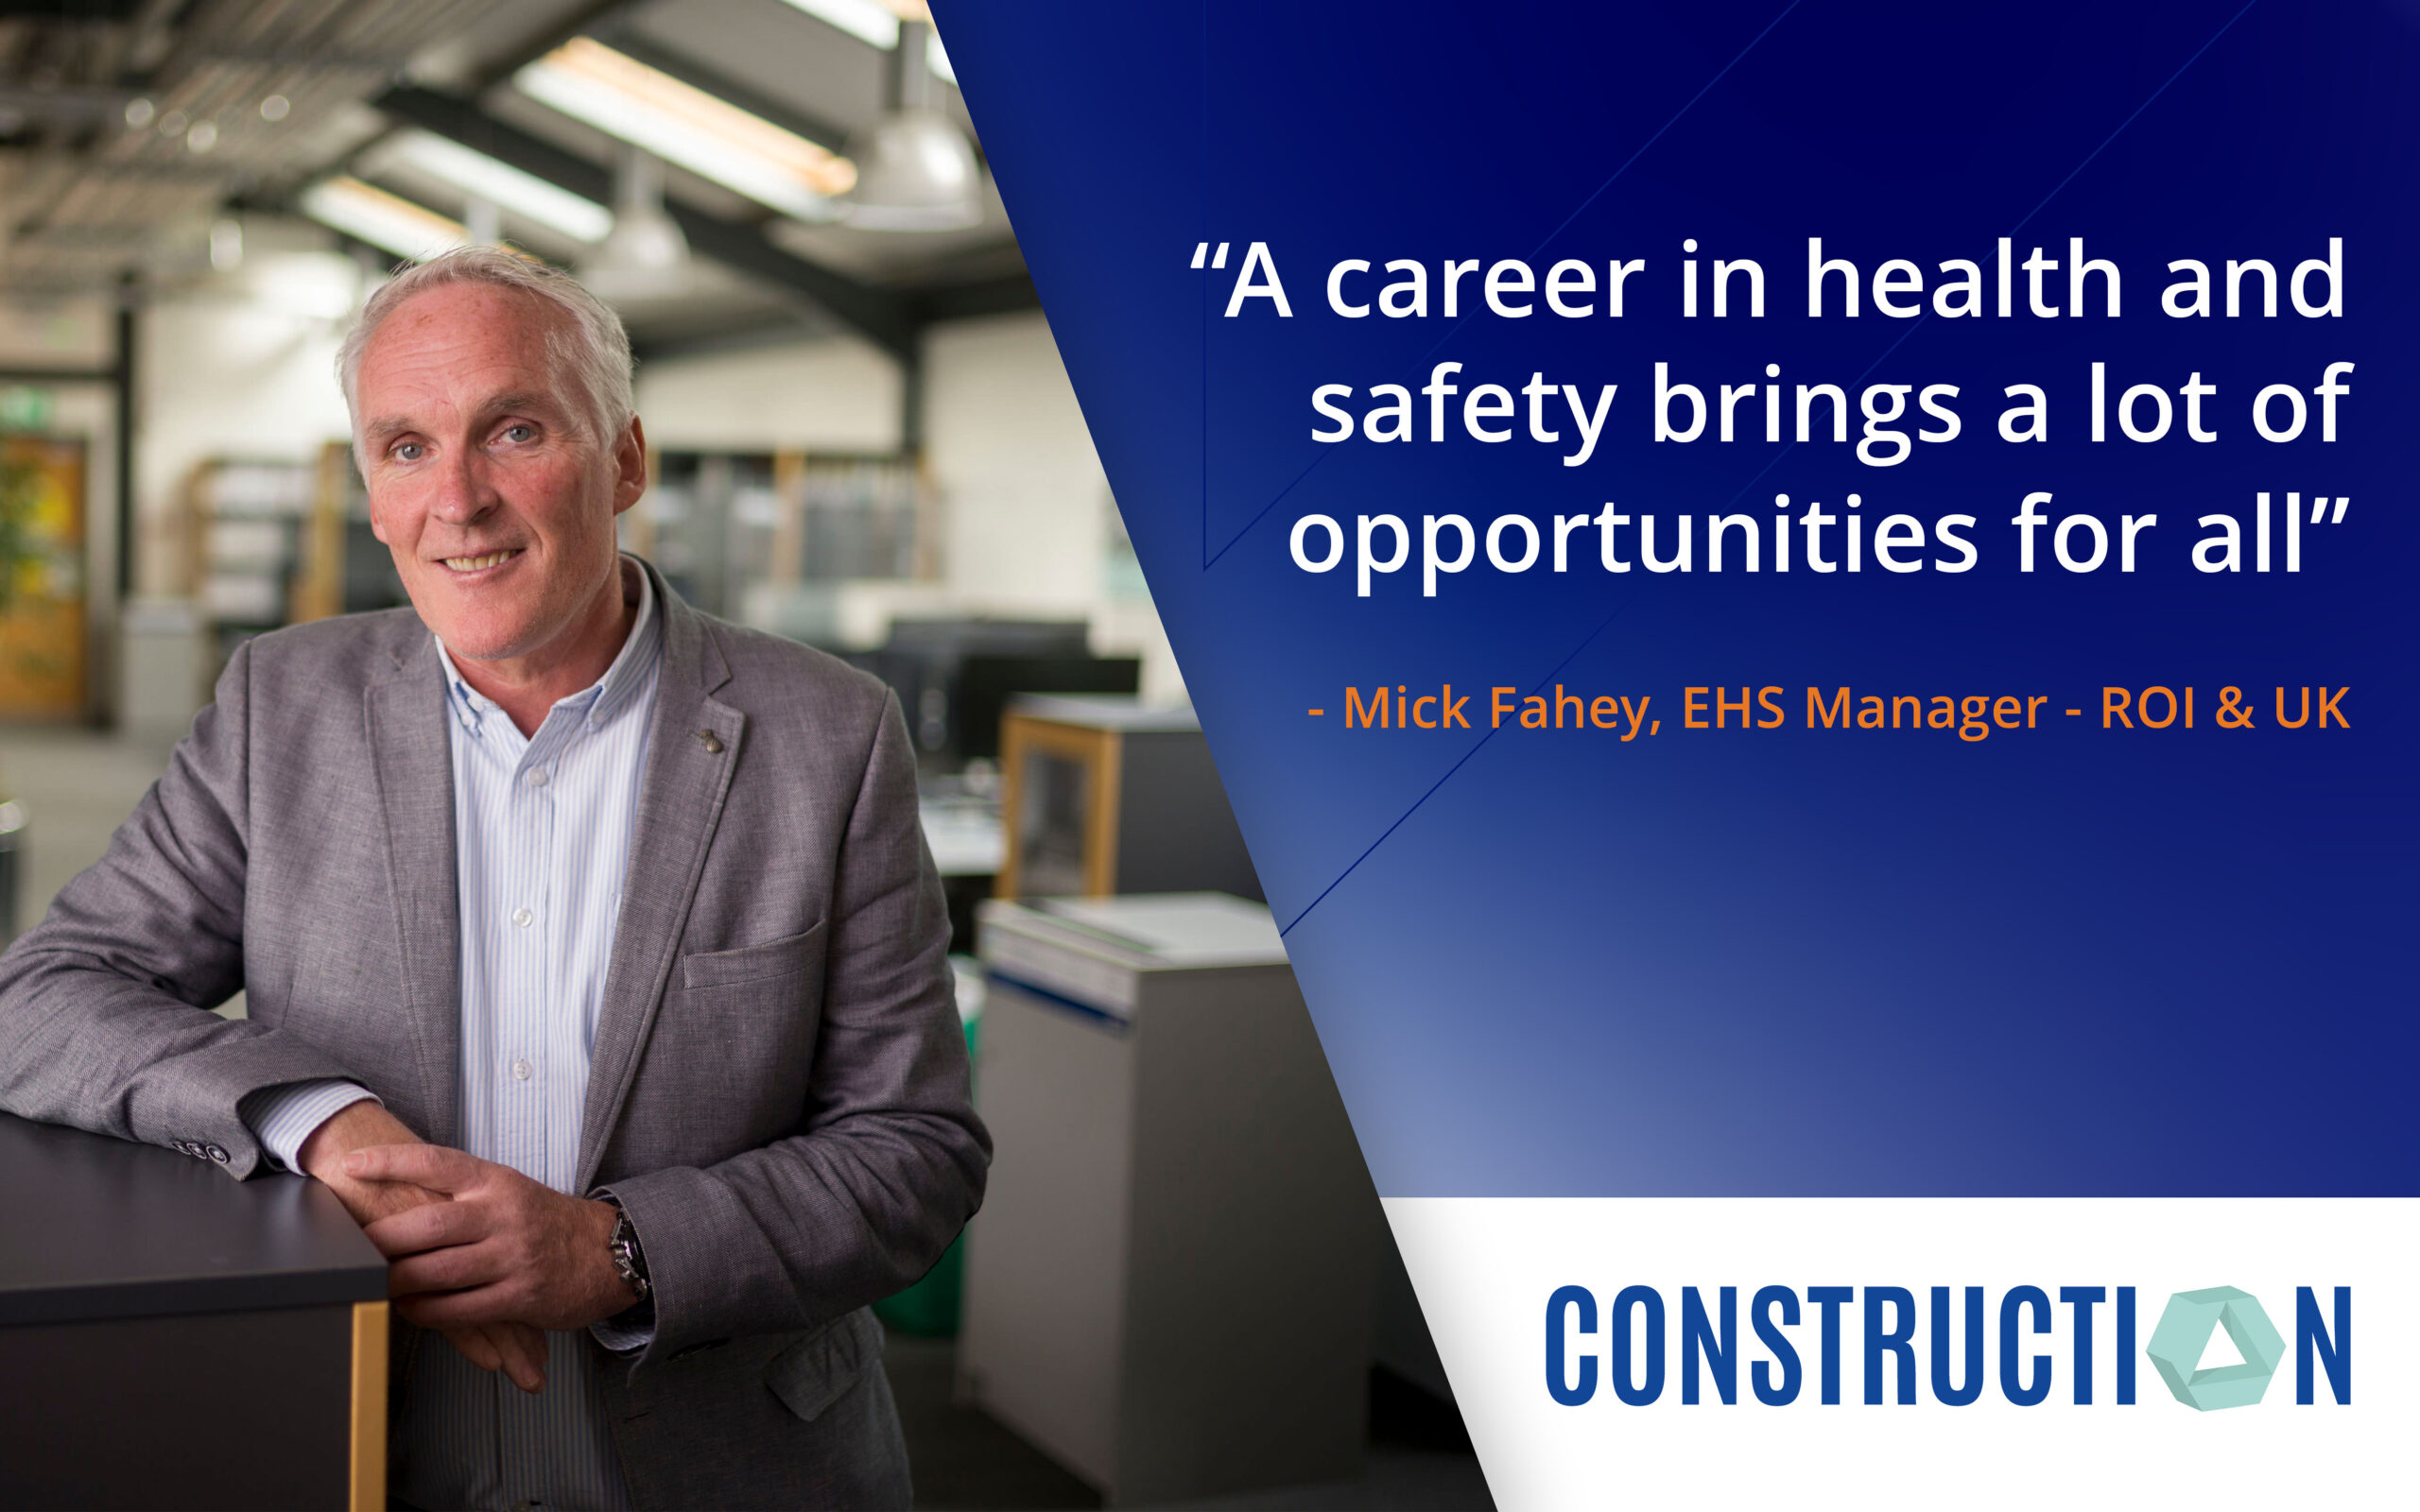 Mick Fahey, EHS Manager - ROI & UK spoke with CIF Construction Magazine